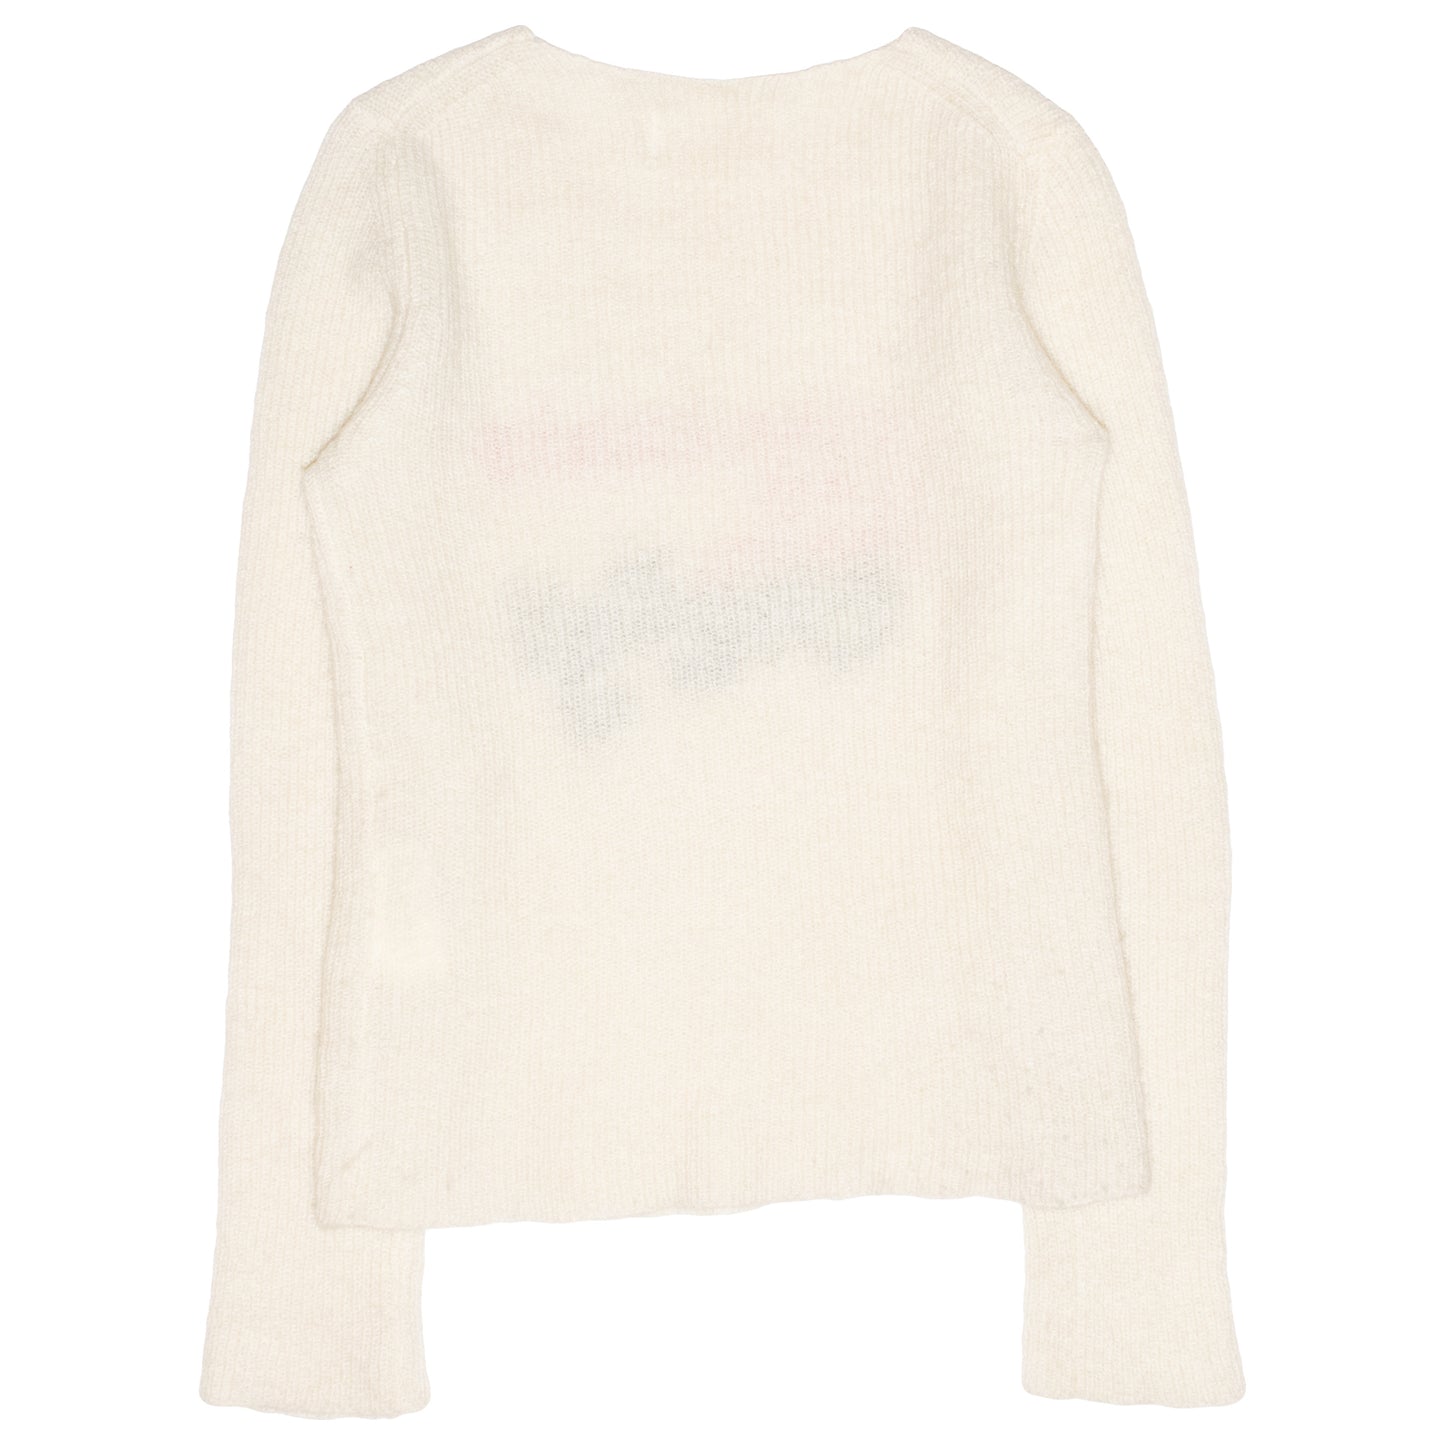 Comme des Garçons GIRL Friendship and Youth Energy Mohair Knit Sweater – AD2015